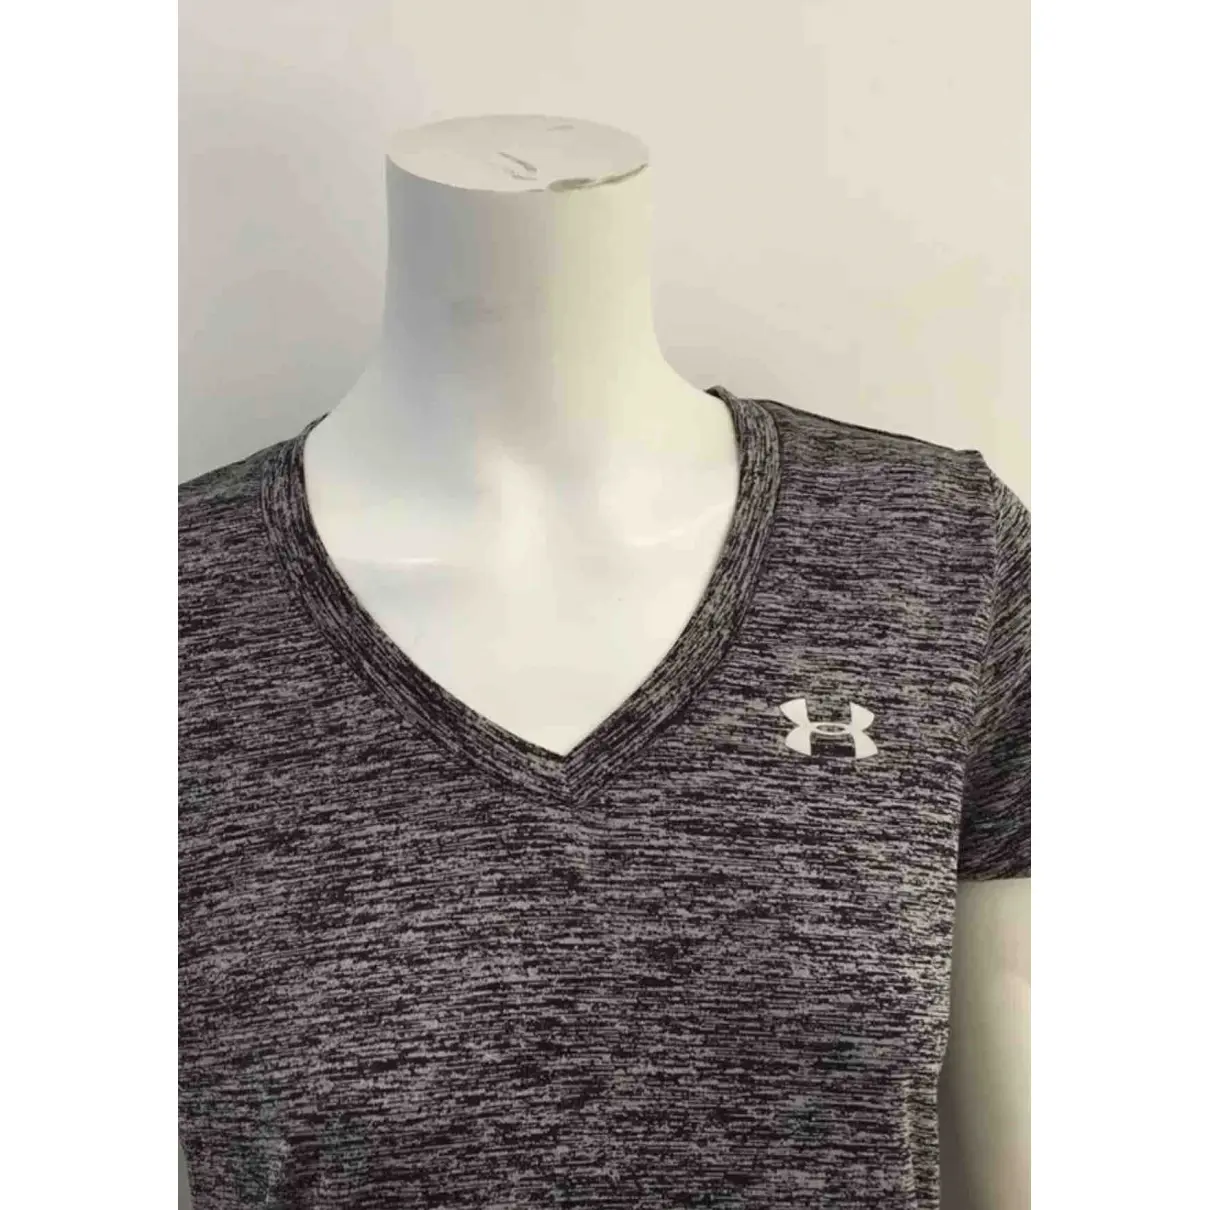 Buy Under Armour T-shirt online